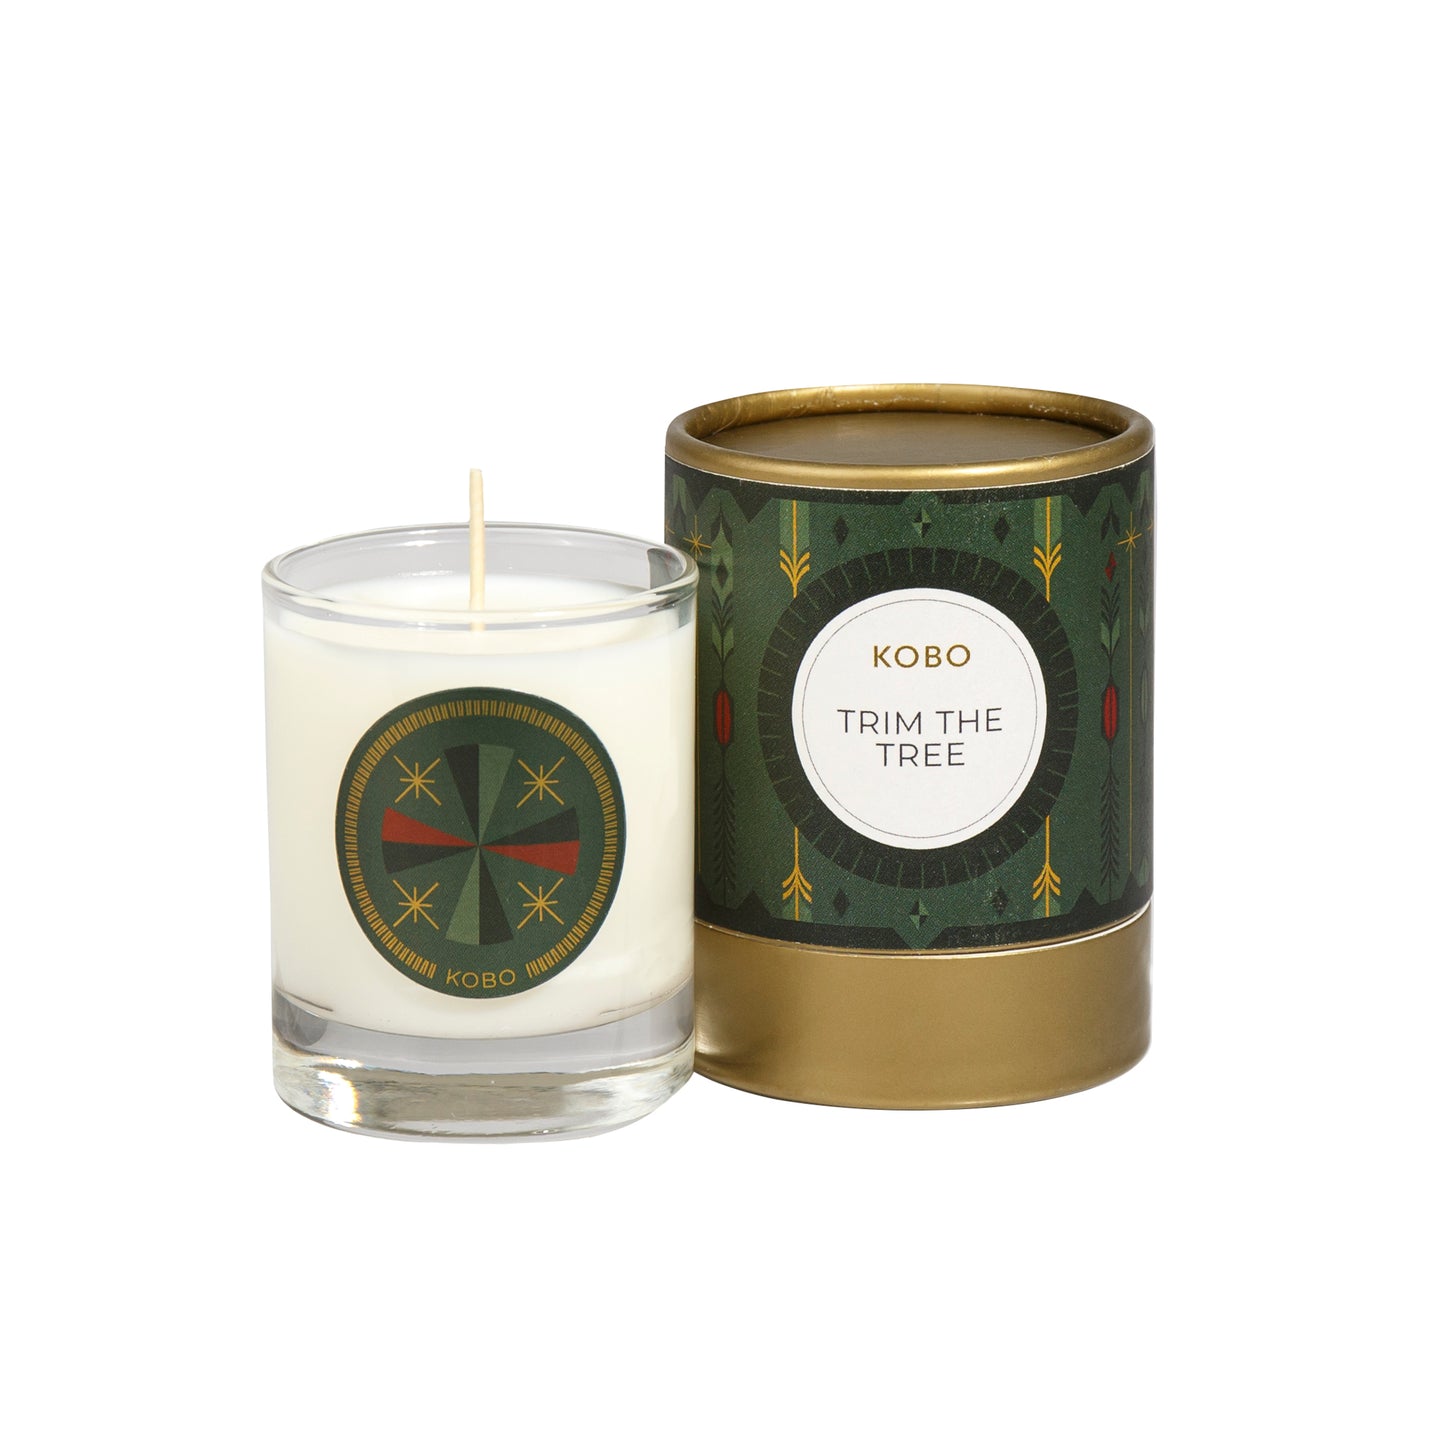 Primary Image of Trim The Tree Votive Candle